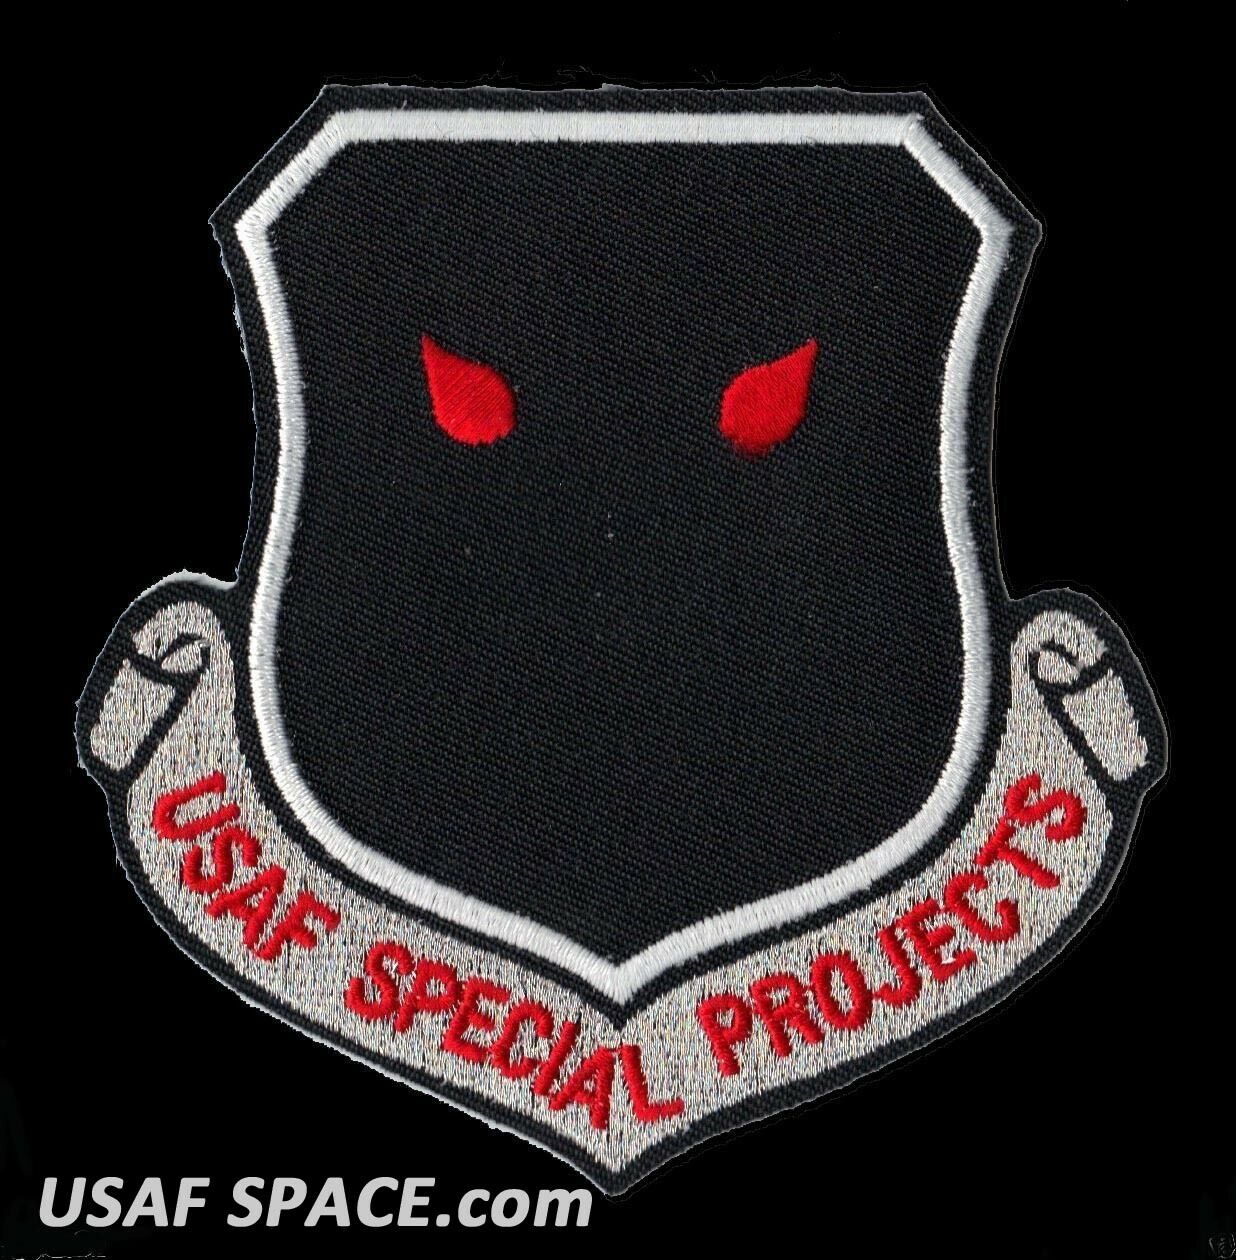 Nro - Usaf Dod Black Ops - Special Projects Division - 4" - Patch